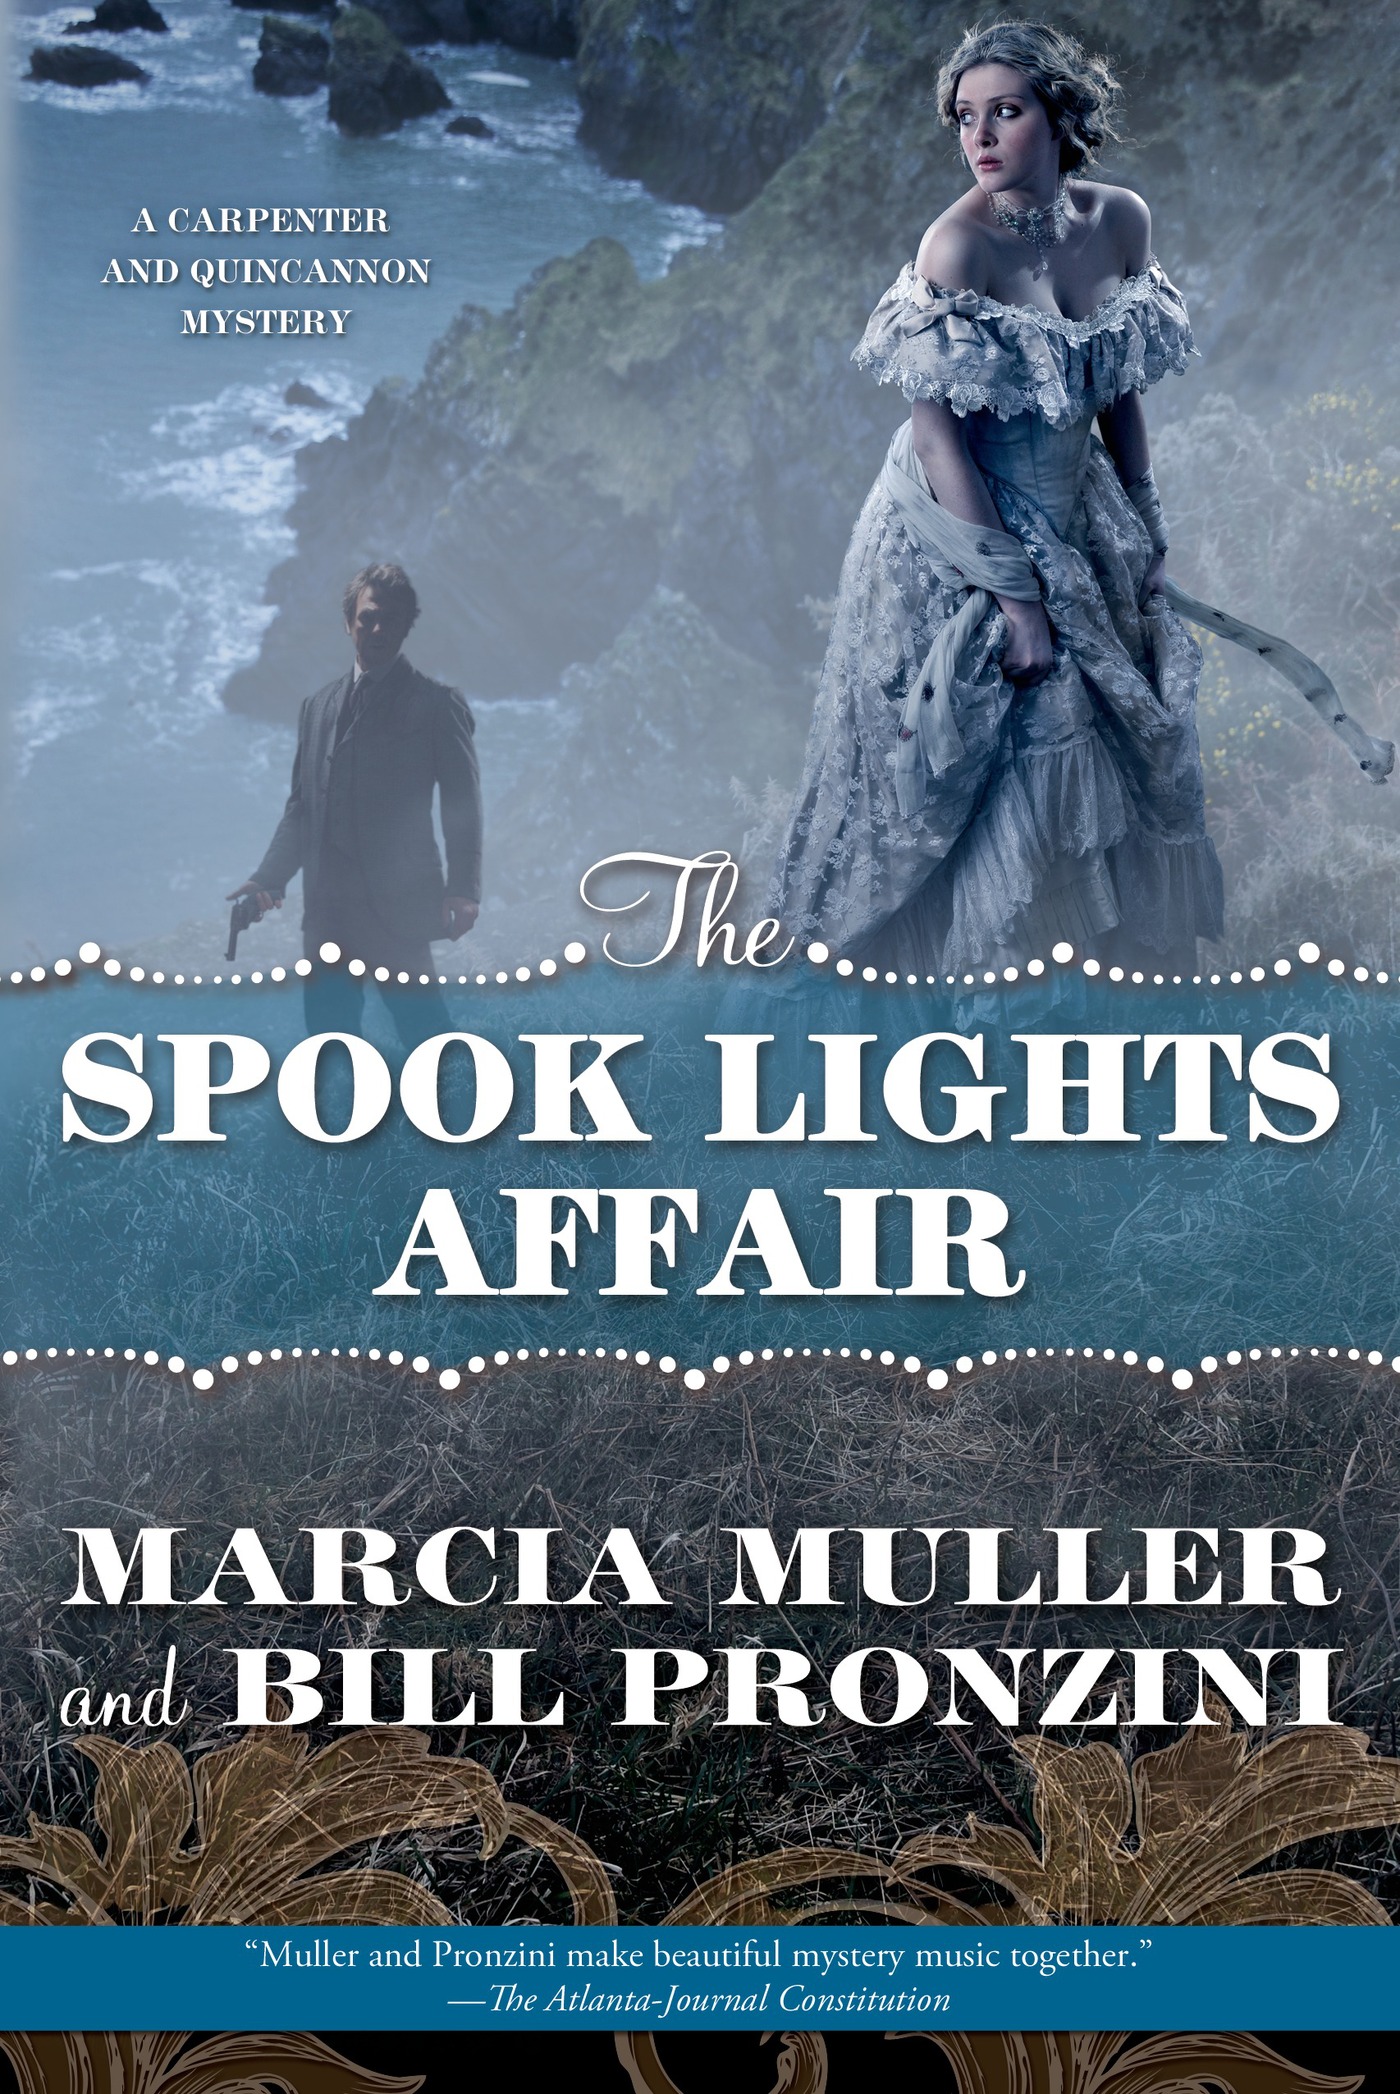 The Spook Lights Affair : A Carpenter and Quincannon Mystery by Marcia Muller, Bill Pronzini